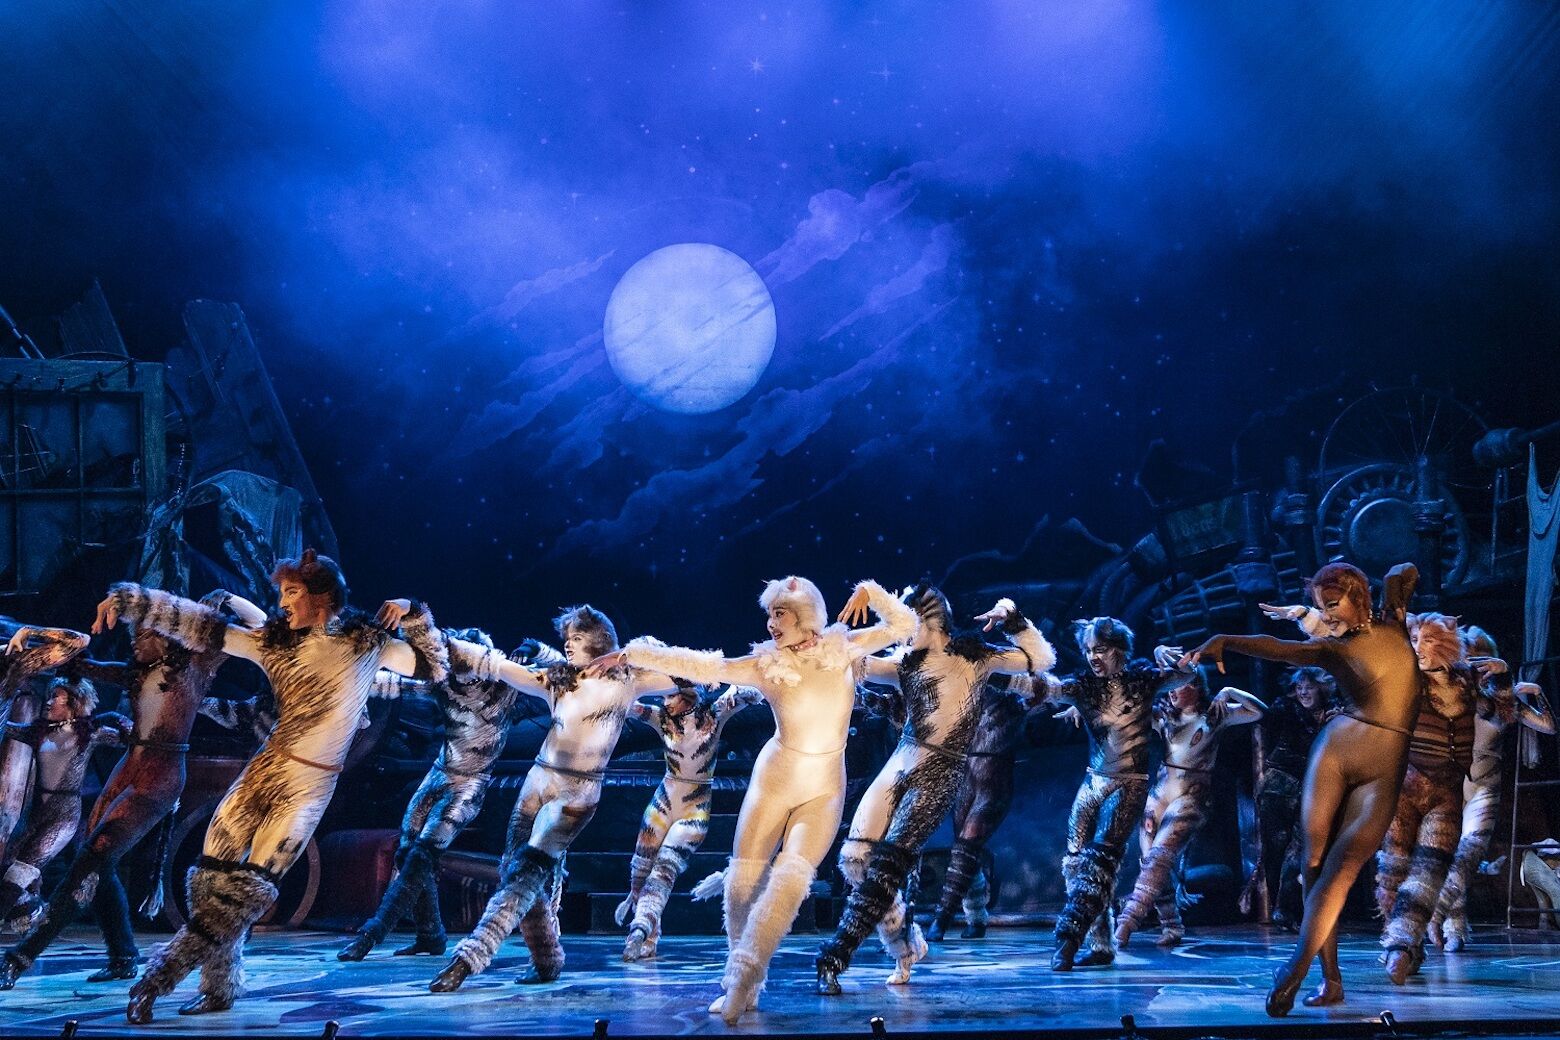 Andrew Lloyd Webber’s iconic Broadway musical ‘Cats’ purrs into